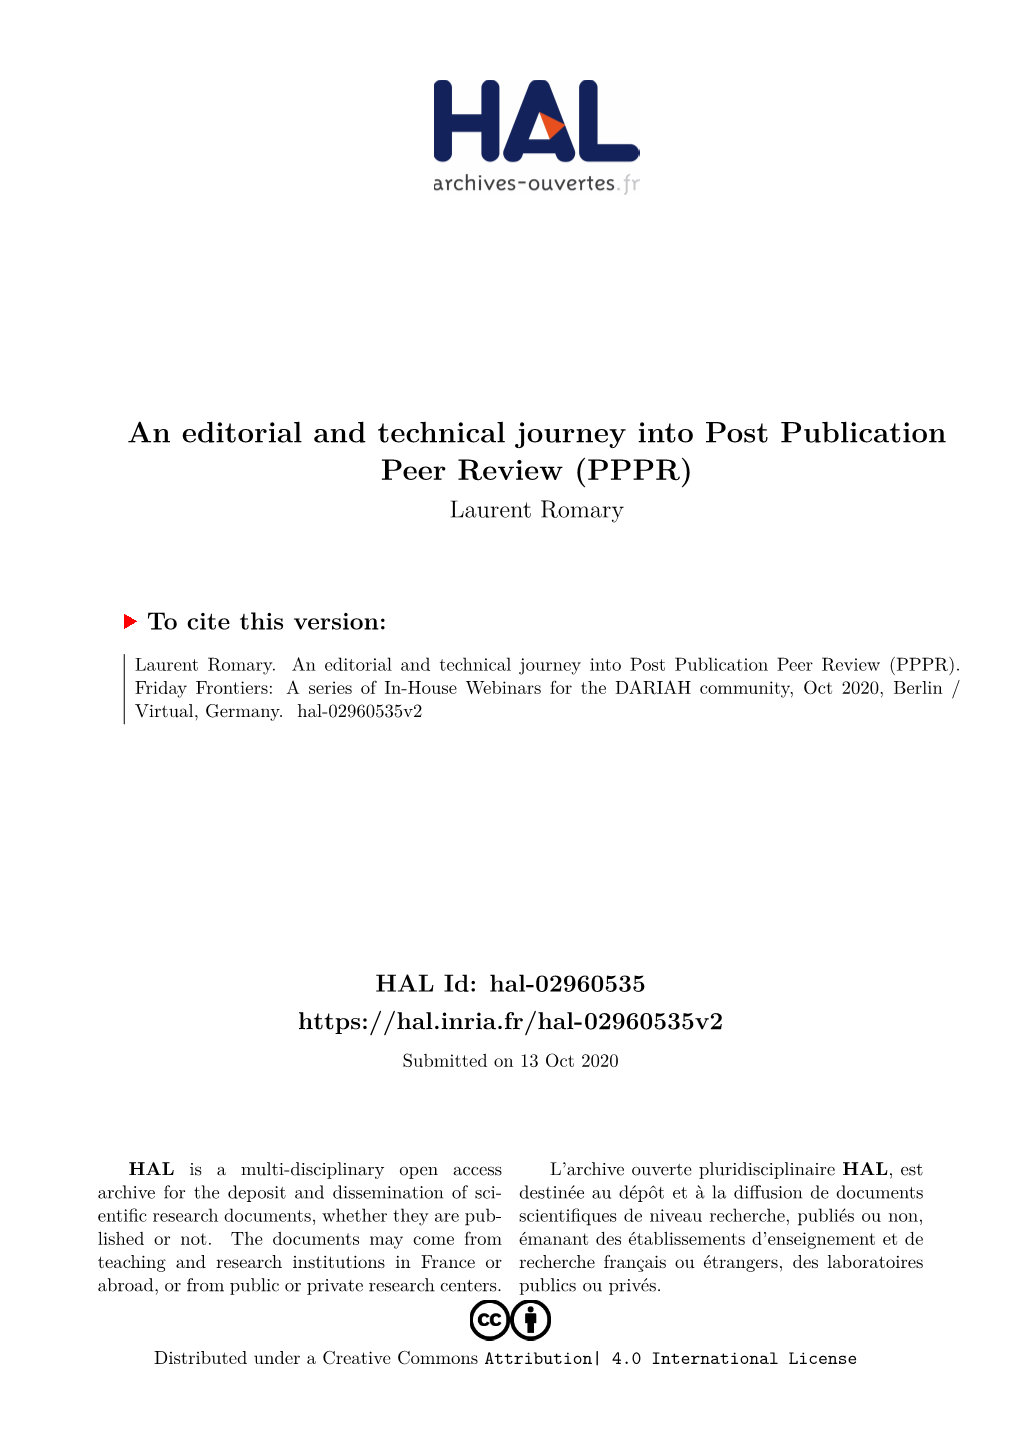 An Editorial and Technical Journey Into Post Publication Peer Review (PPPR) Laurent Romary